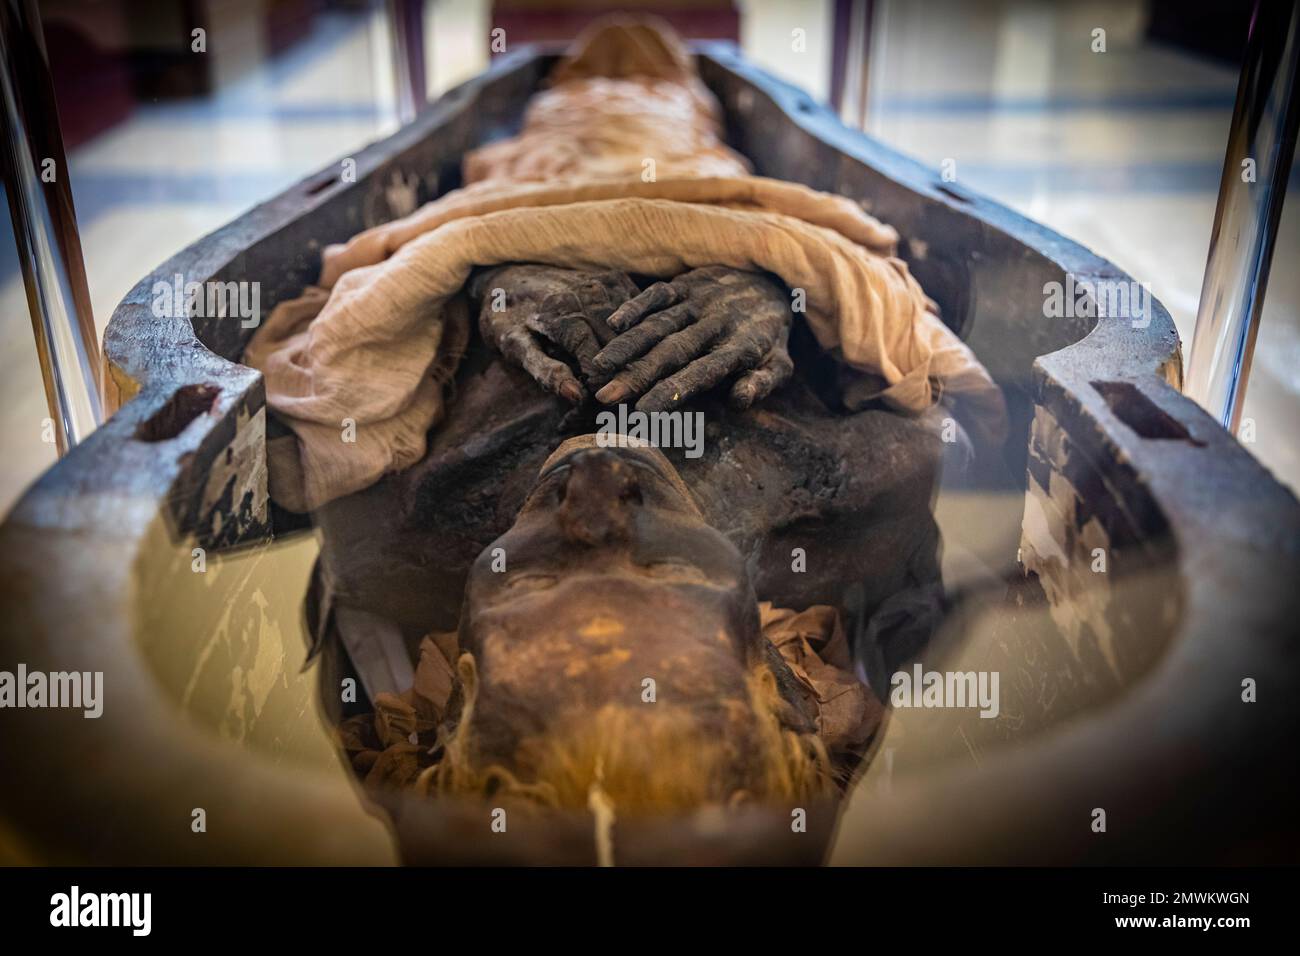 Unmasked mummy with hands crossed at Egyptian Museum, Cairo, Egypt Stock Photo